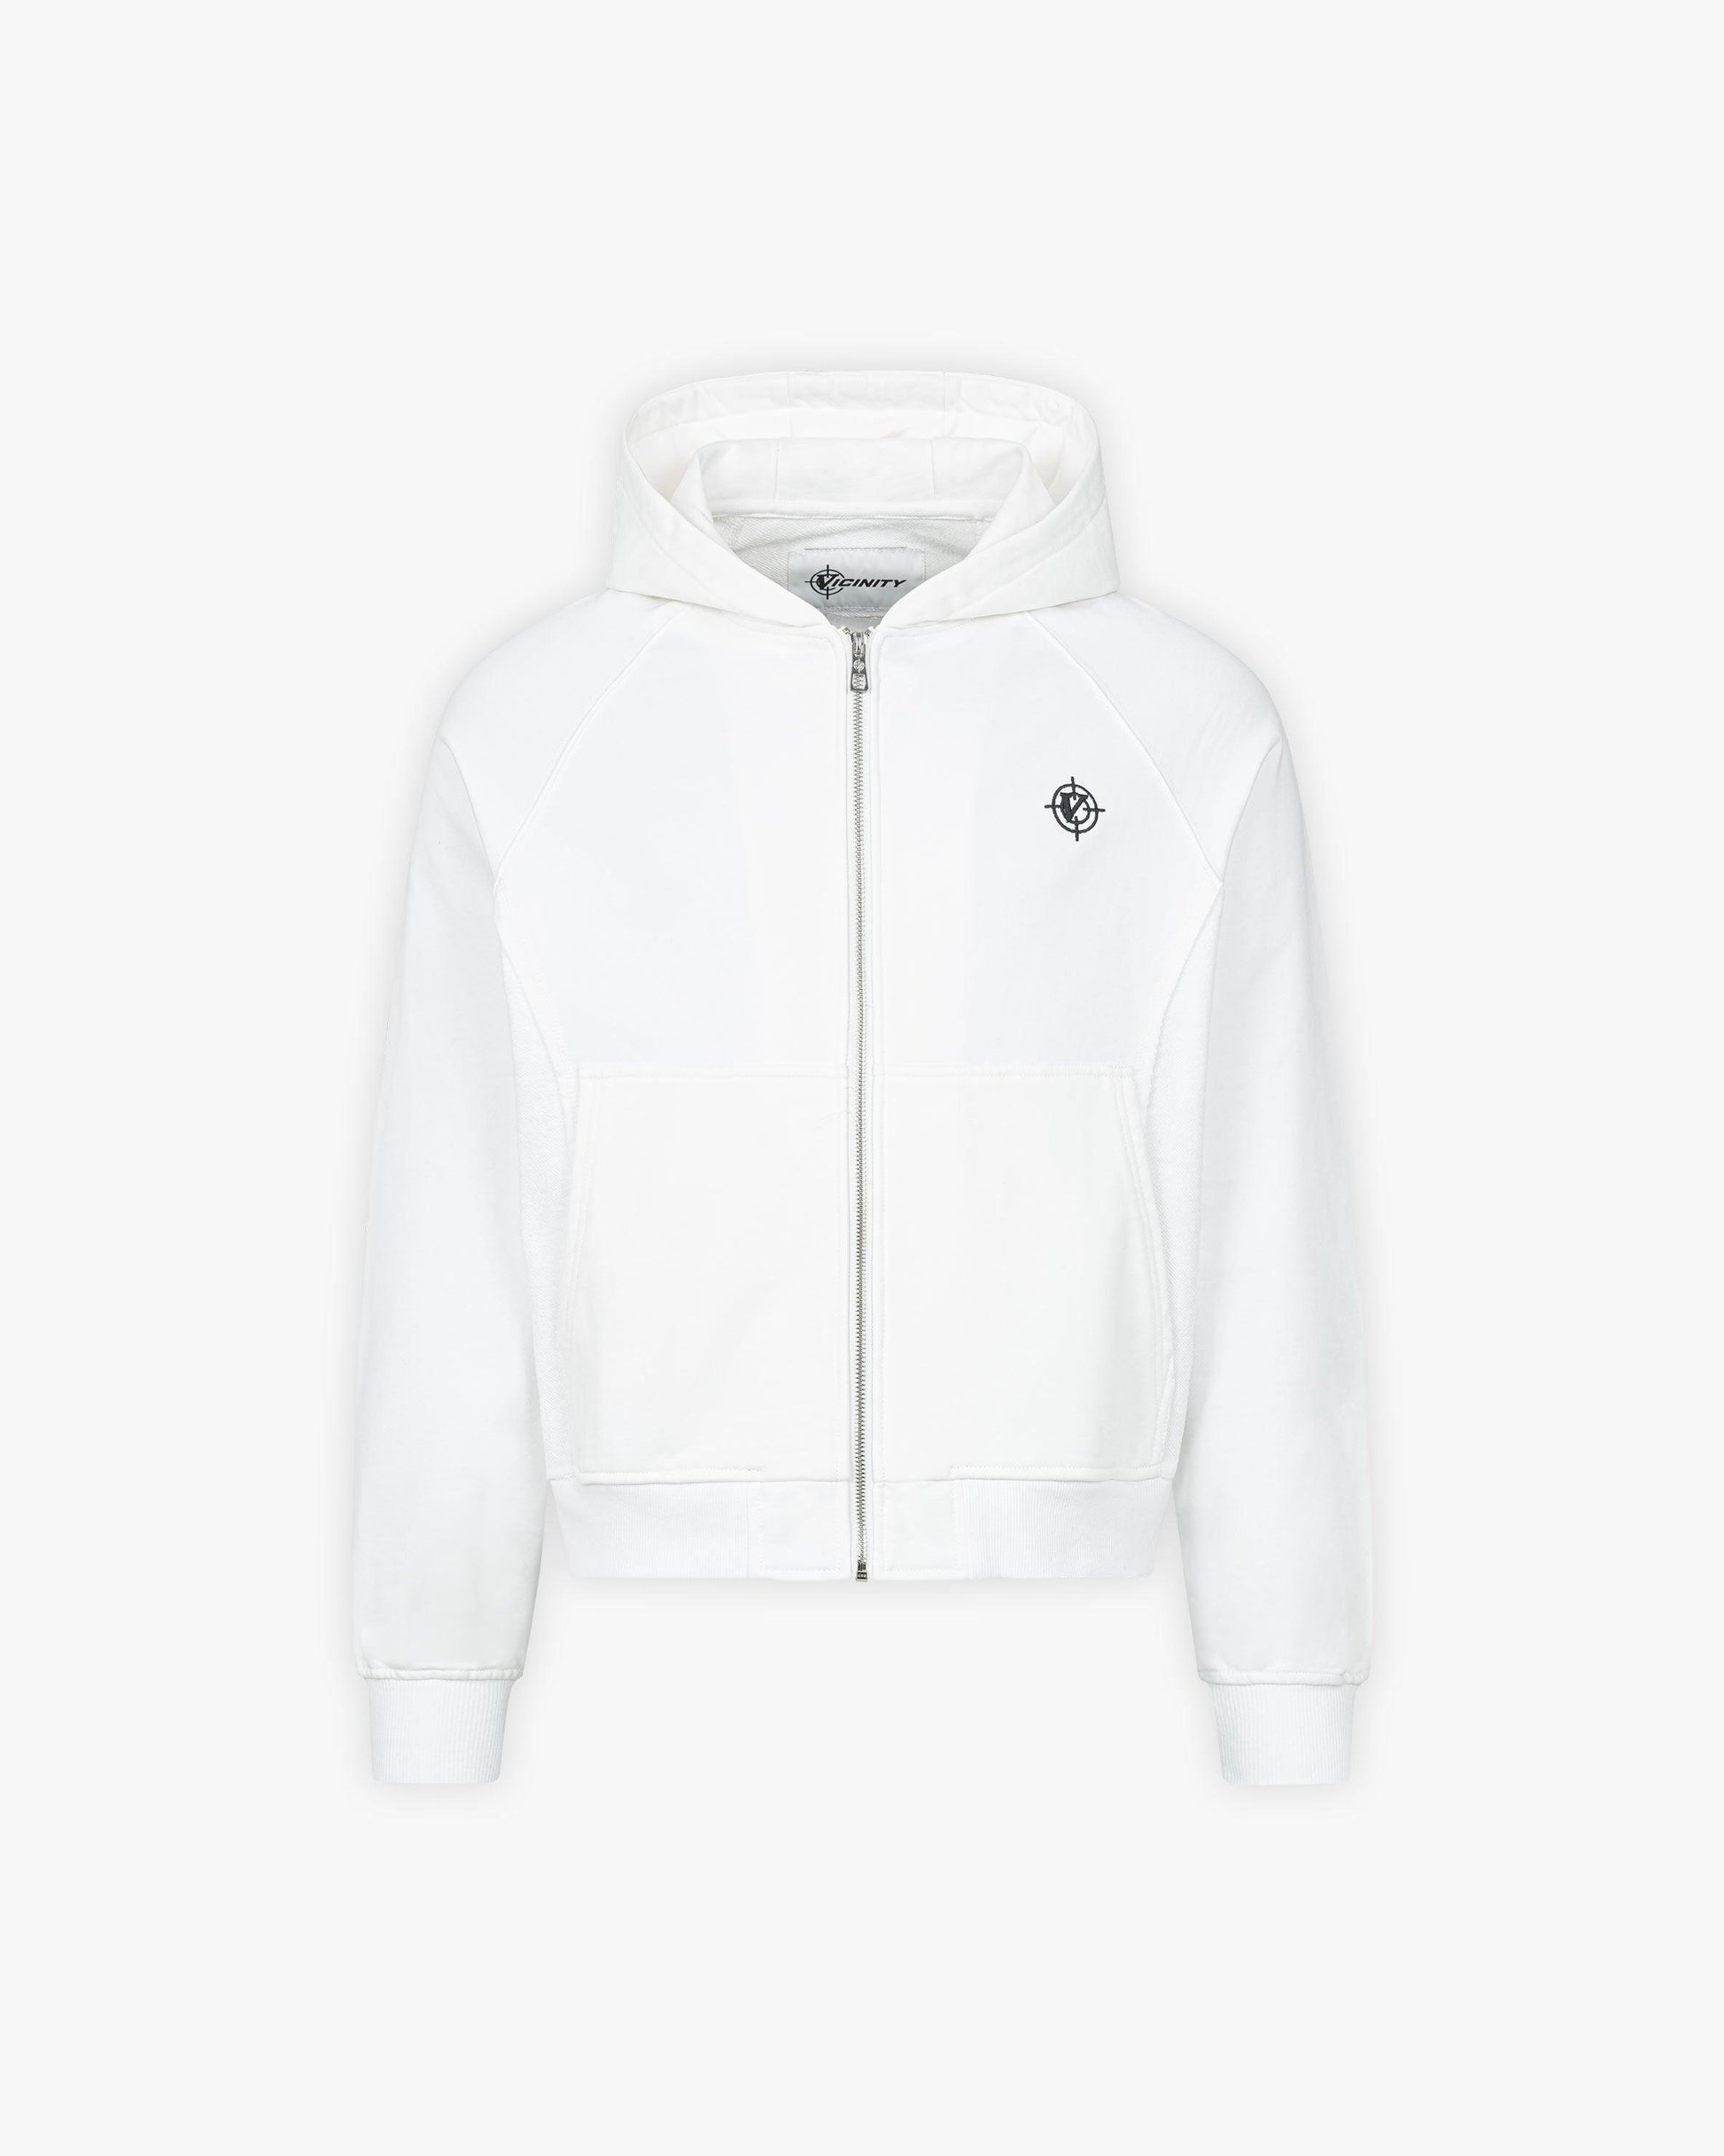 INSIDE OUT ZIP HOODIE WHITE - VICINITY